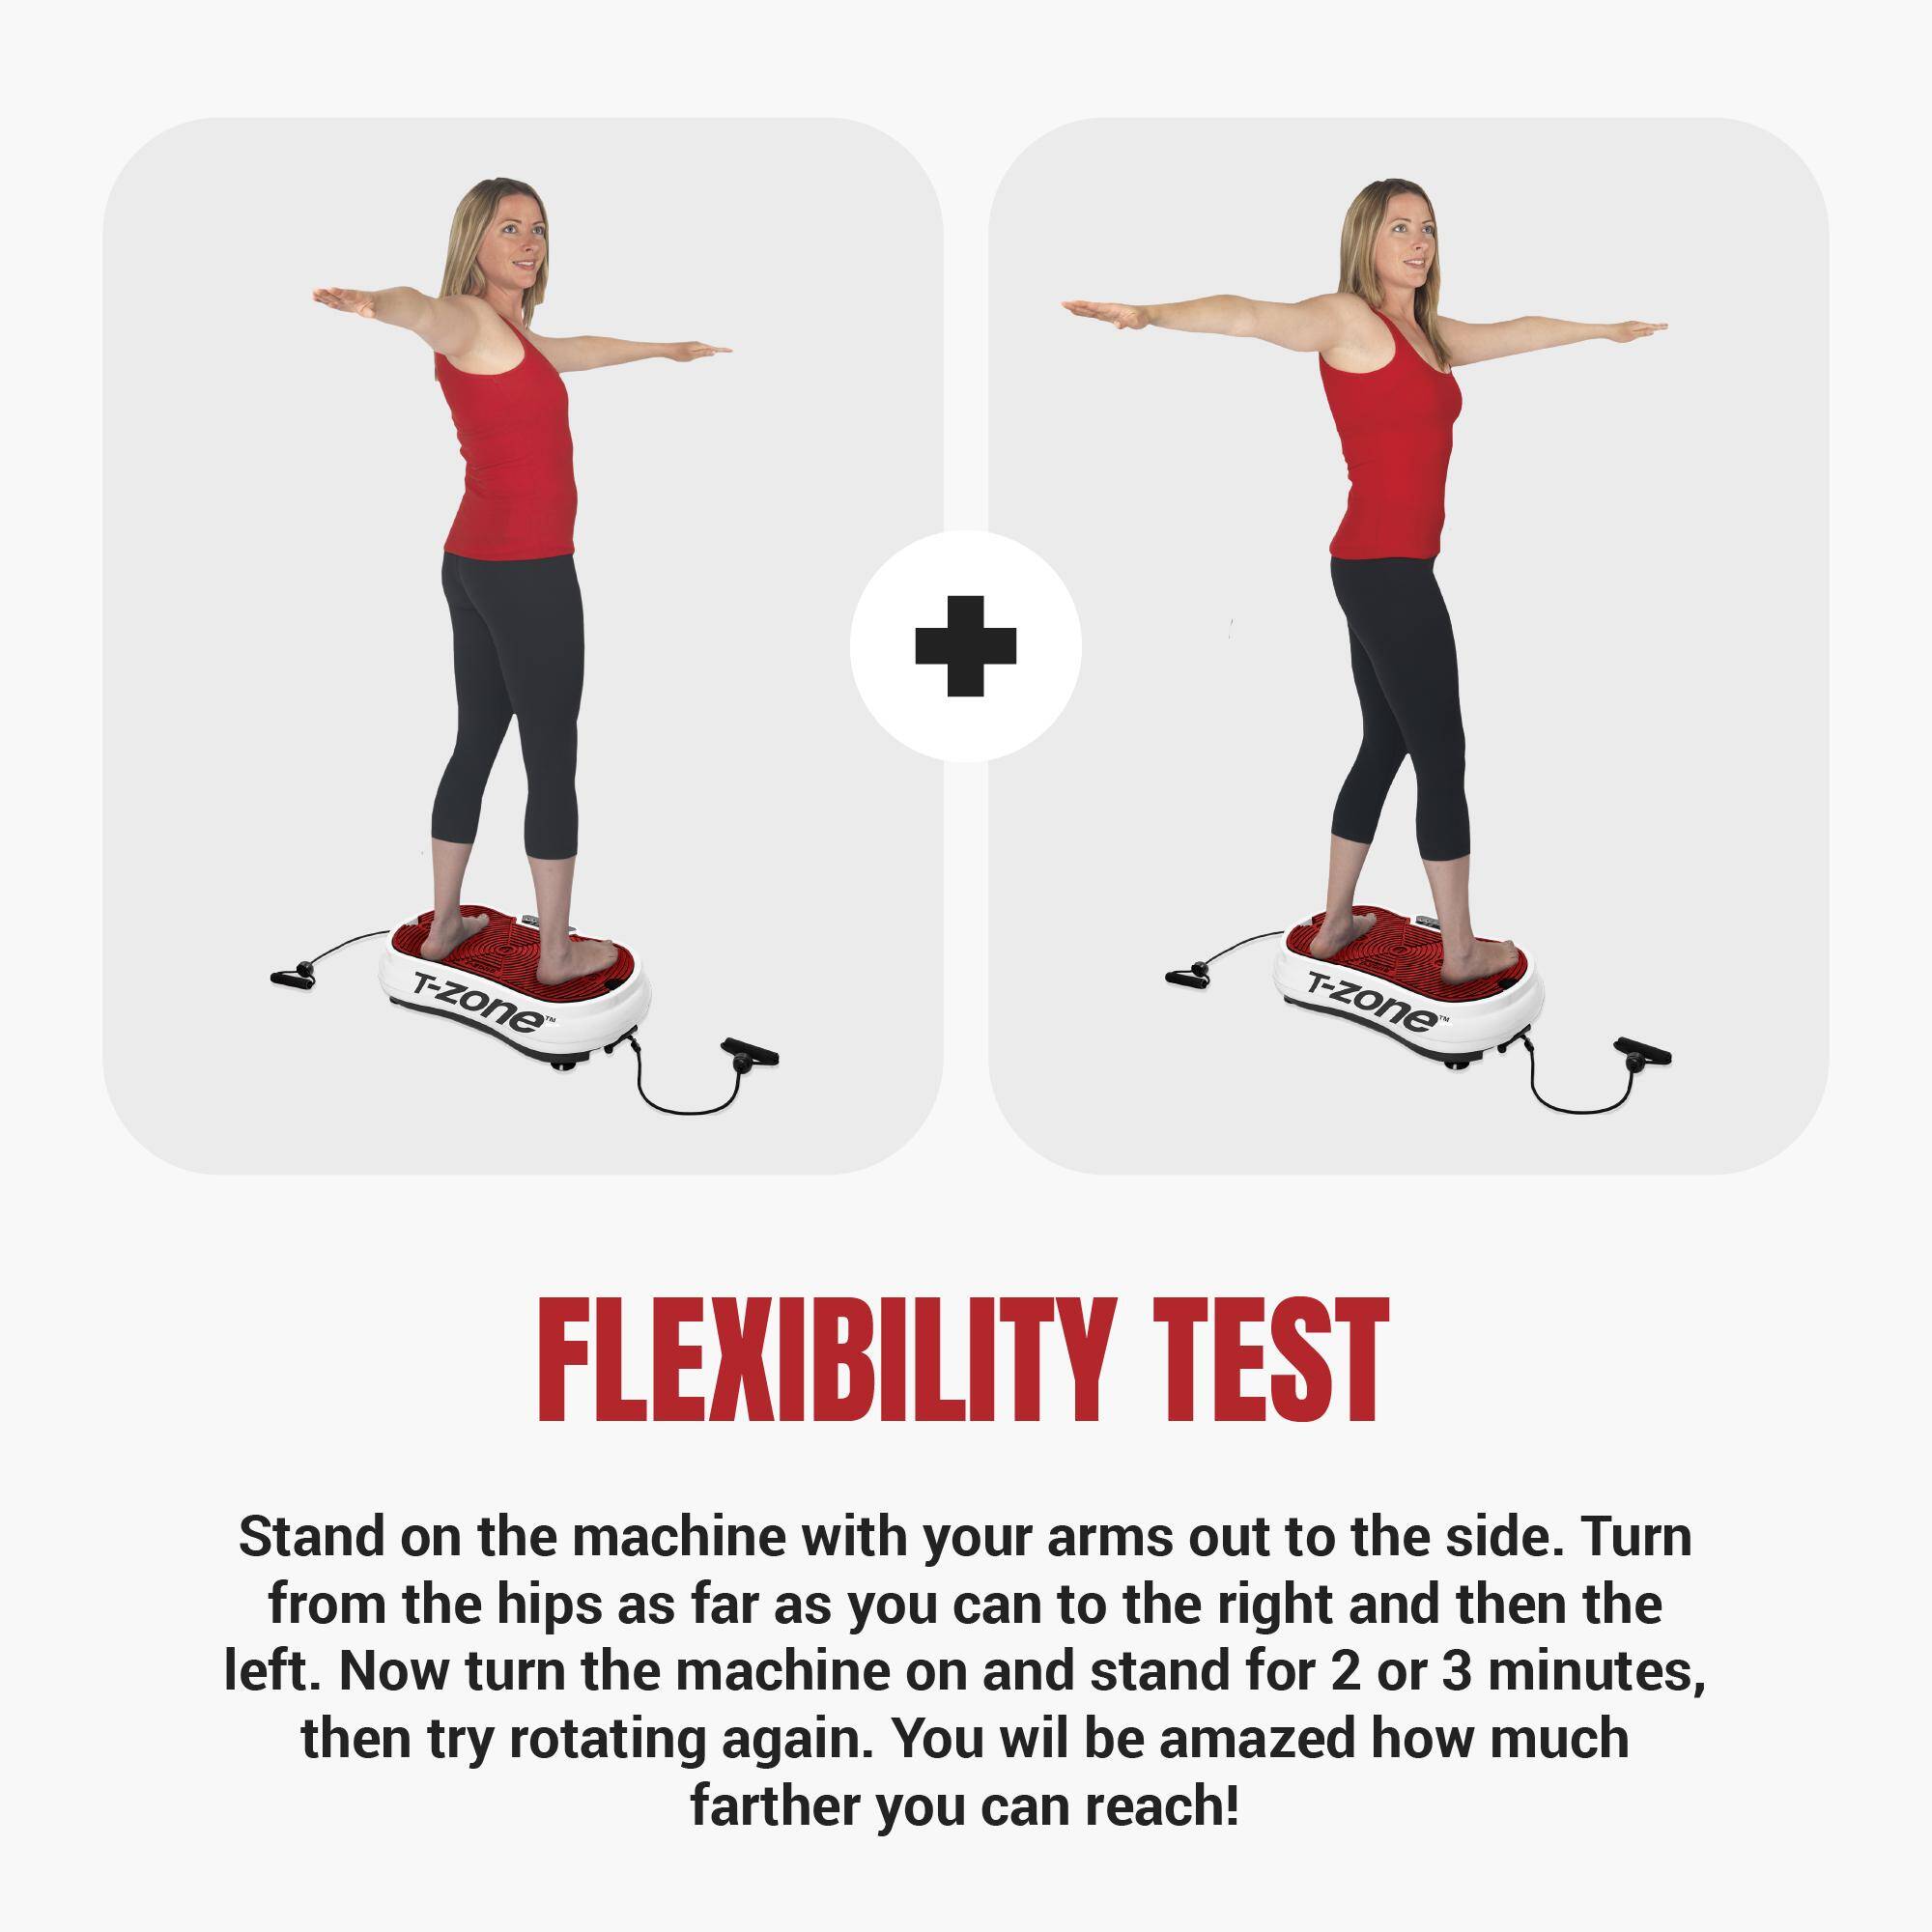 Vibration Plate - WHAT YOU SHOULD KNOW BEFORE USING VIBRATION